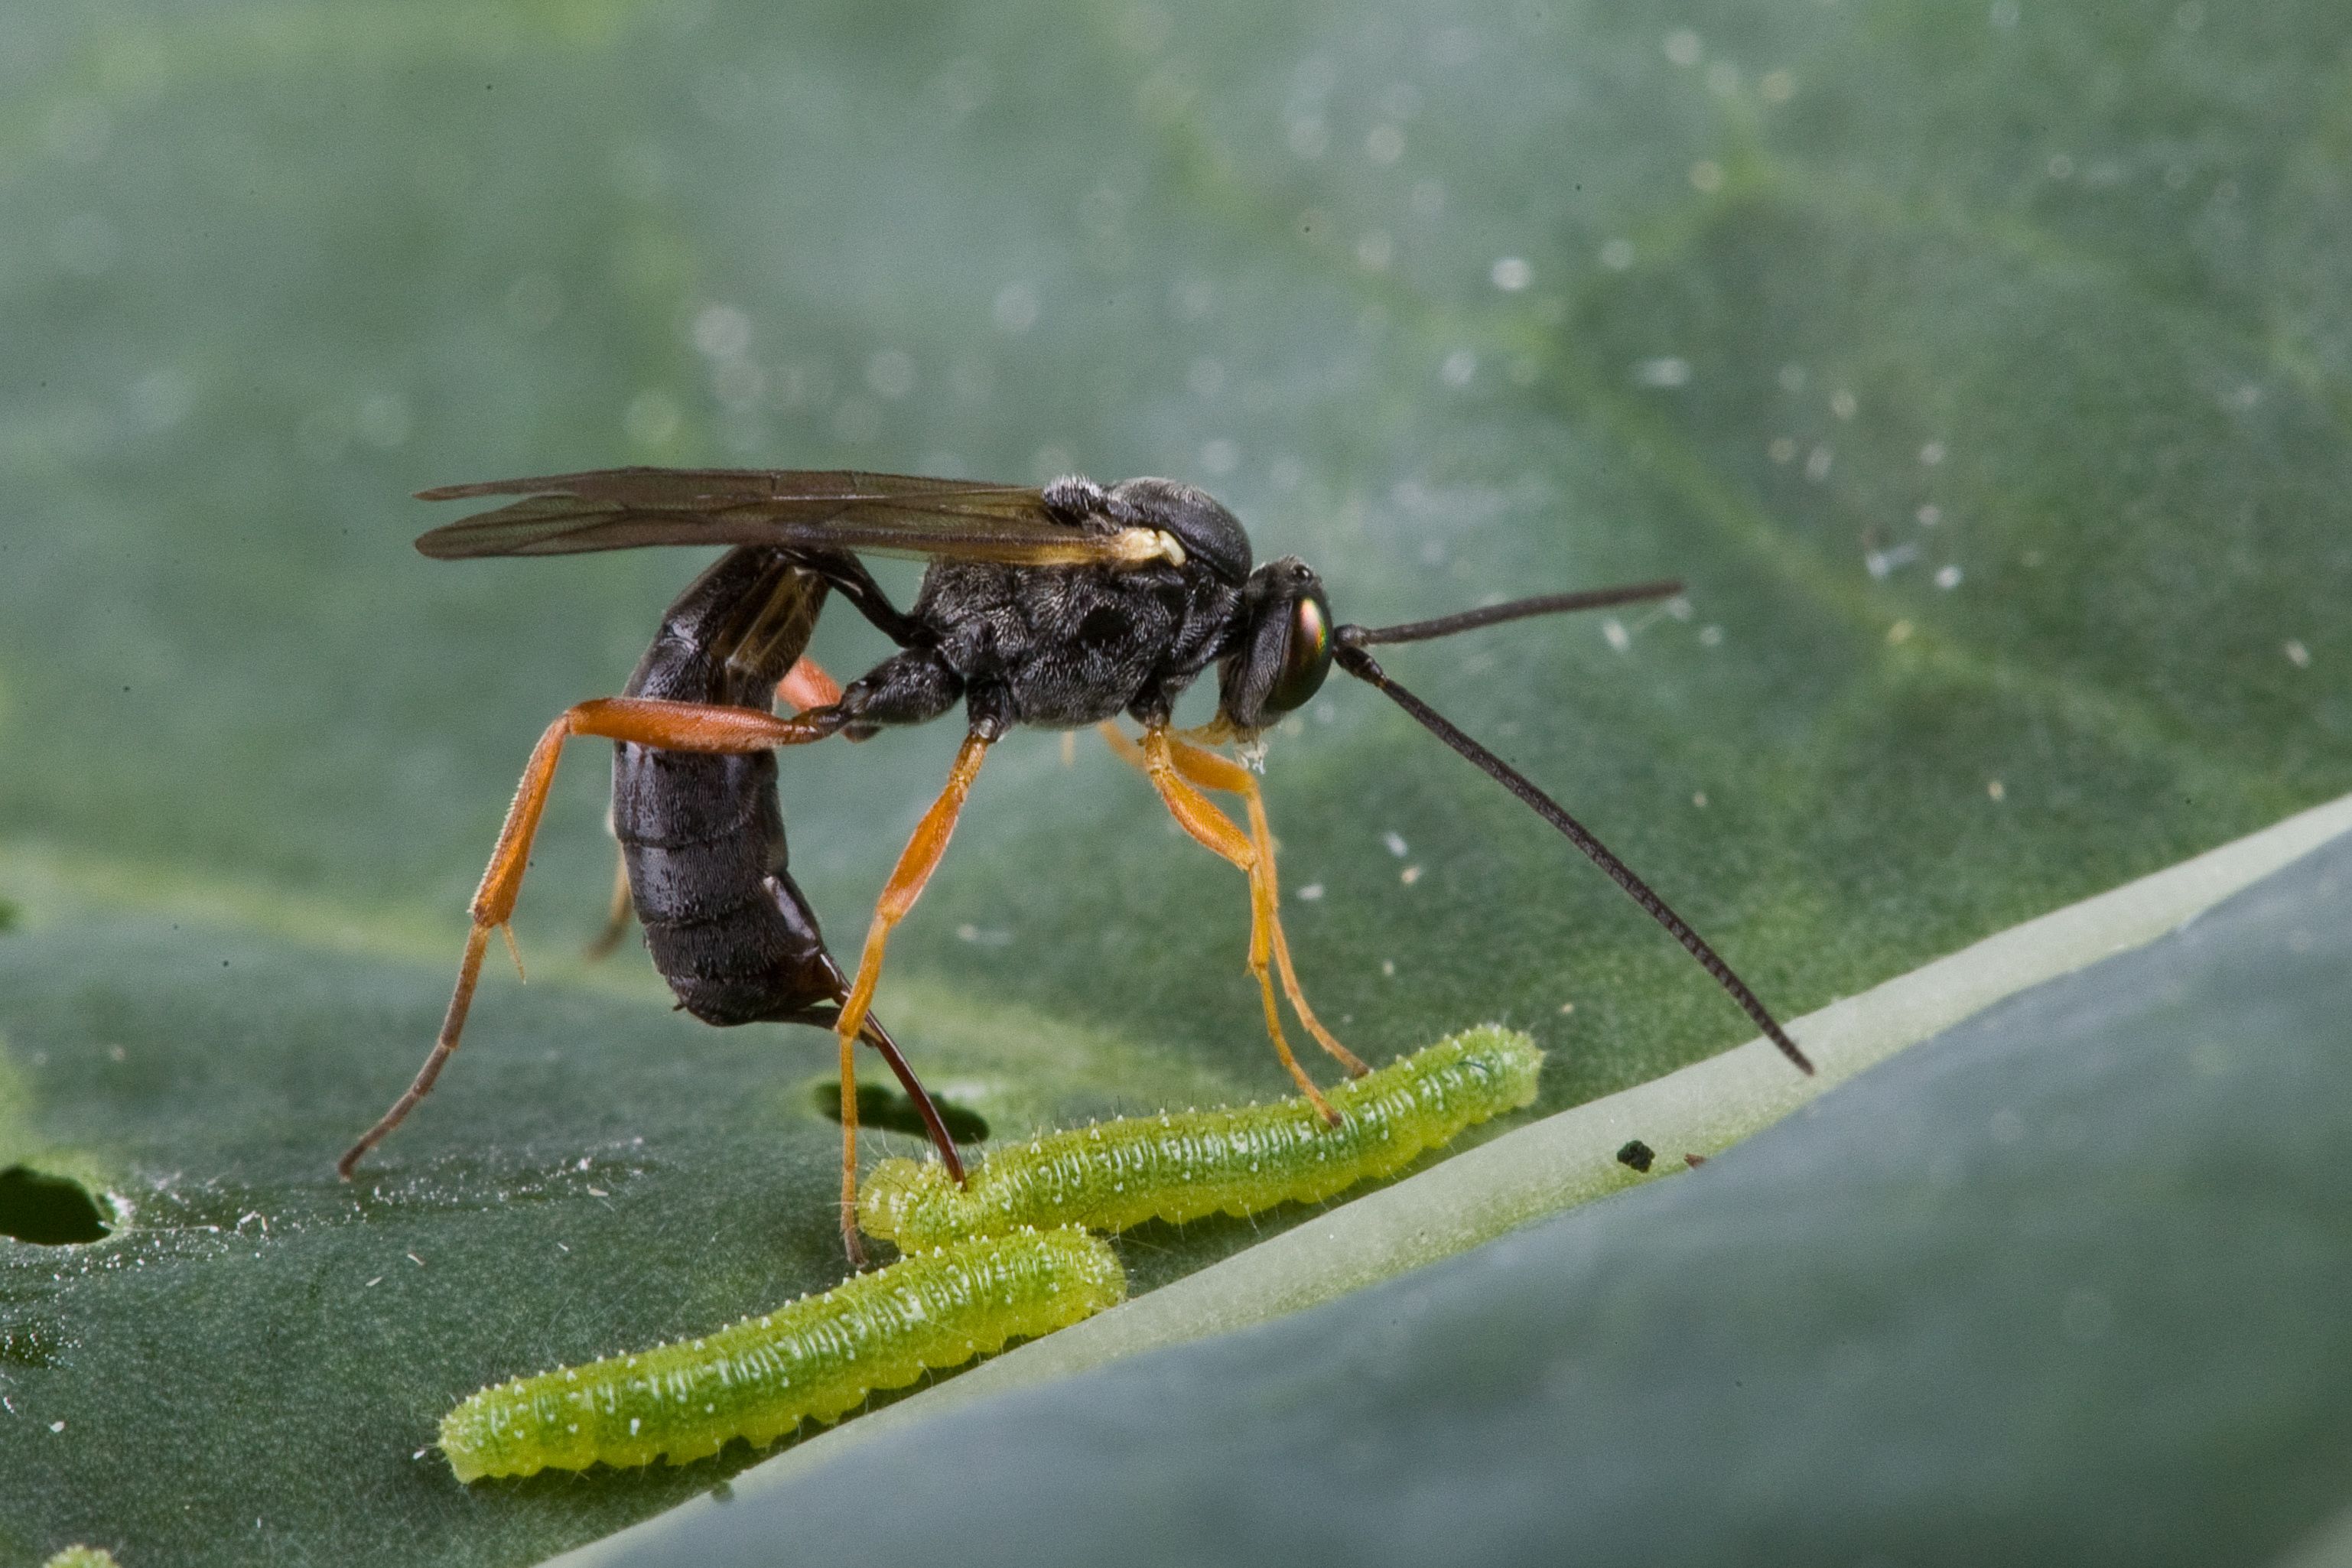 A black parasitic wasp with orange legs is inserting an appendage into a caterpillar where it will deposit eggs that will turn into larva and feed on the host caterpillar until the caterpillar dies. 